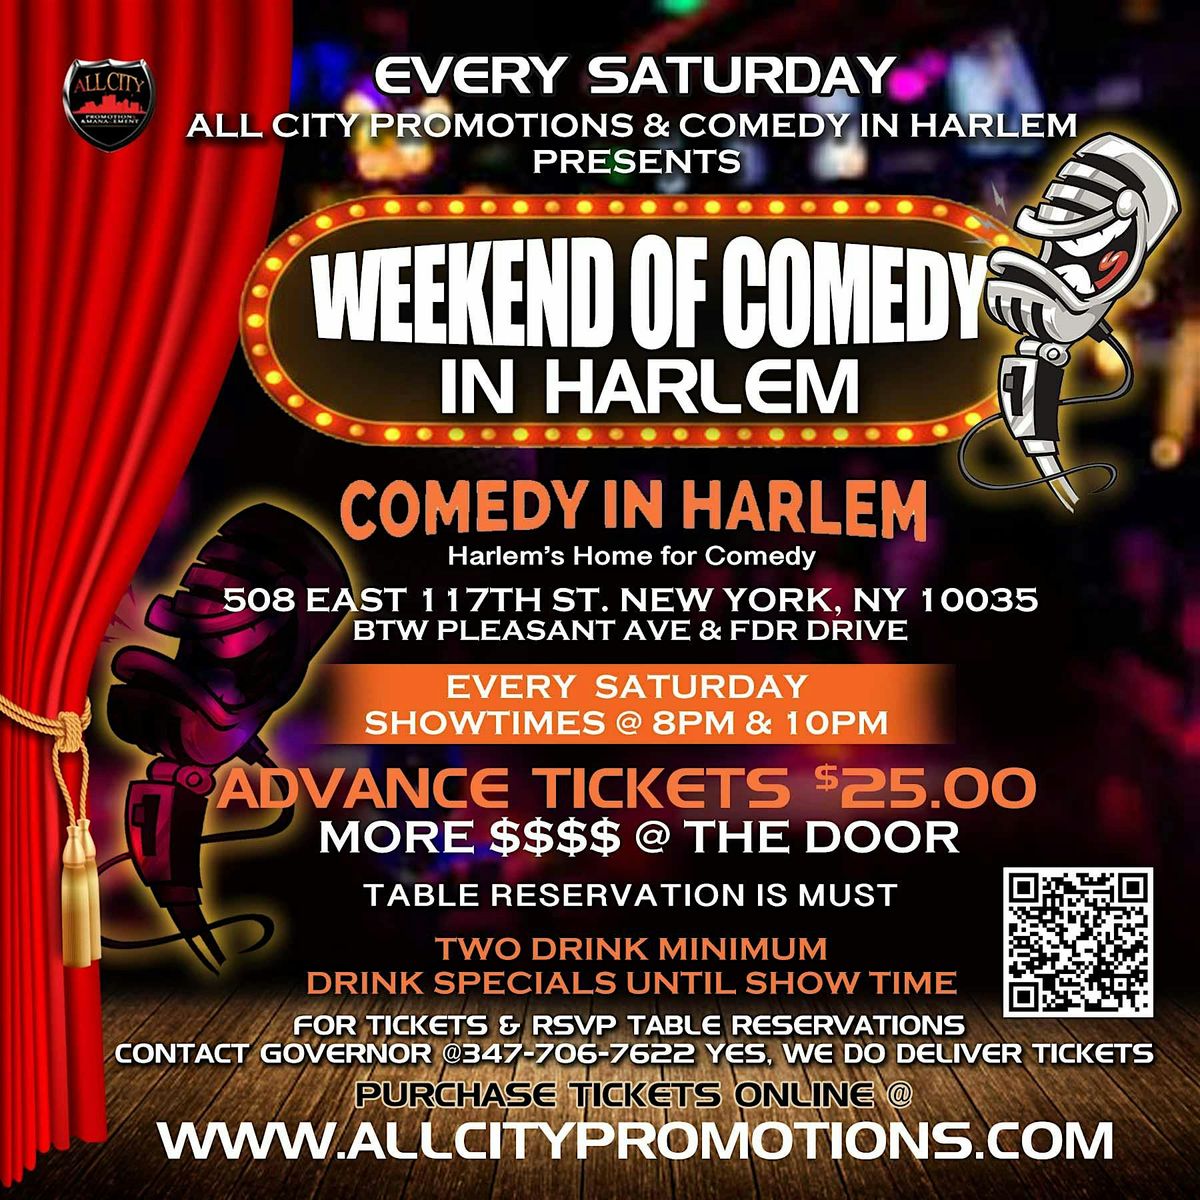 Saturday July 13th, Weekend of Comedy In Harlem @ Comedy In Harlem